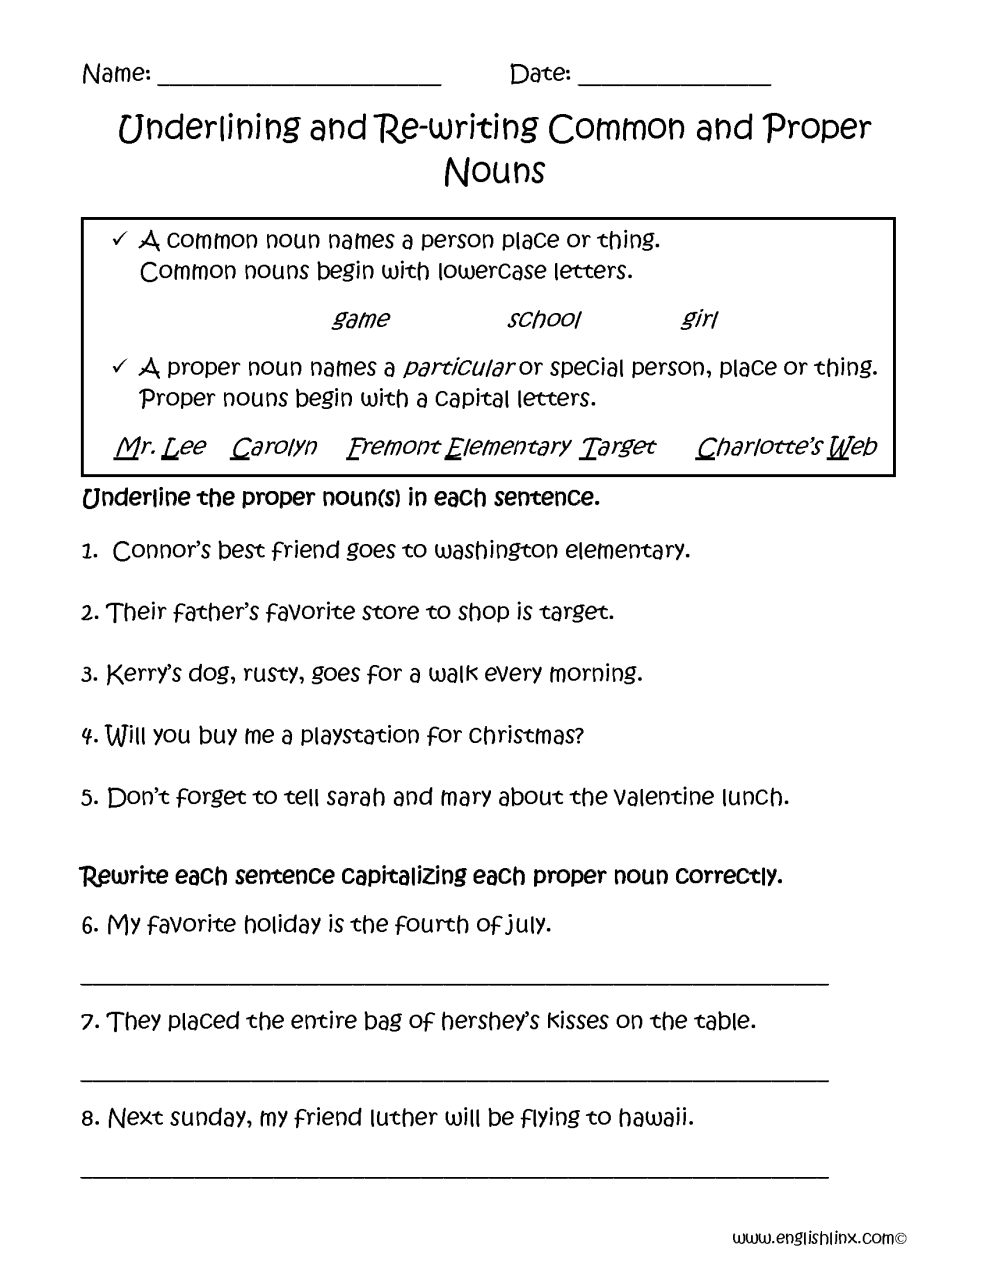 Common And Proper Nouns Worksheets For Grade 2